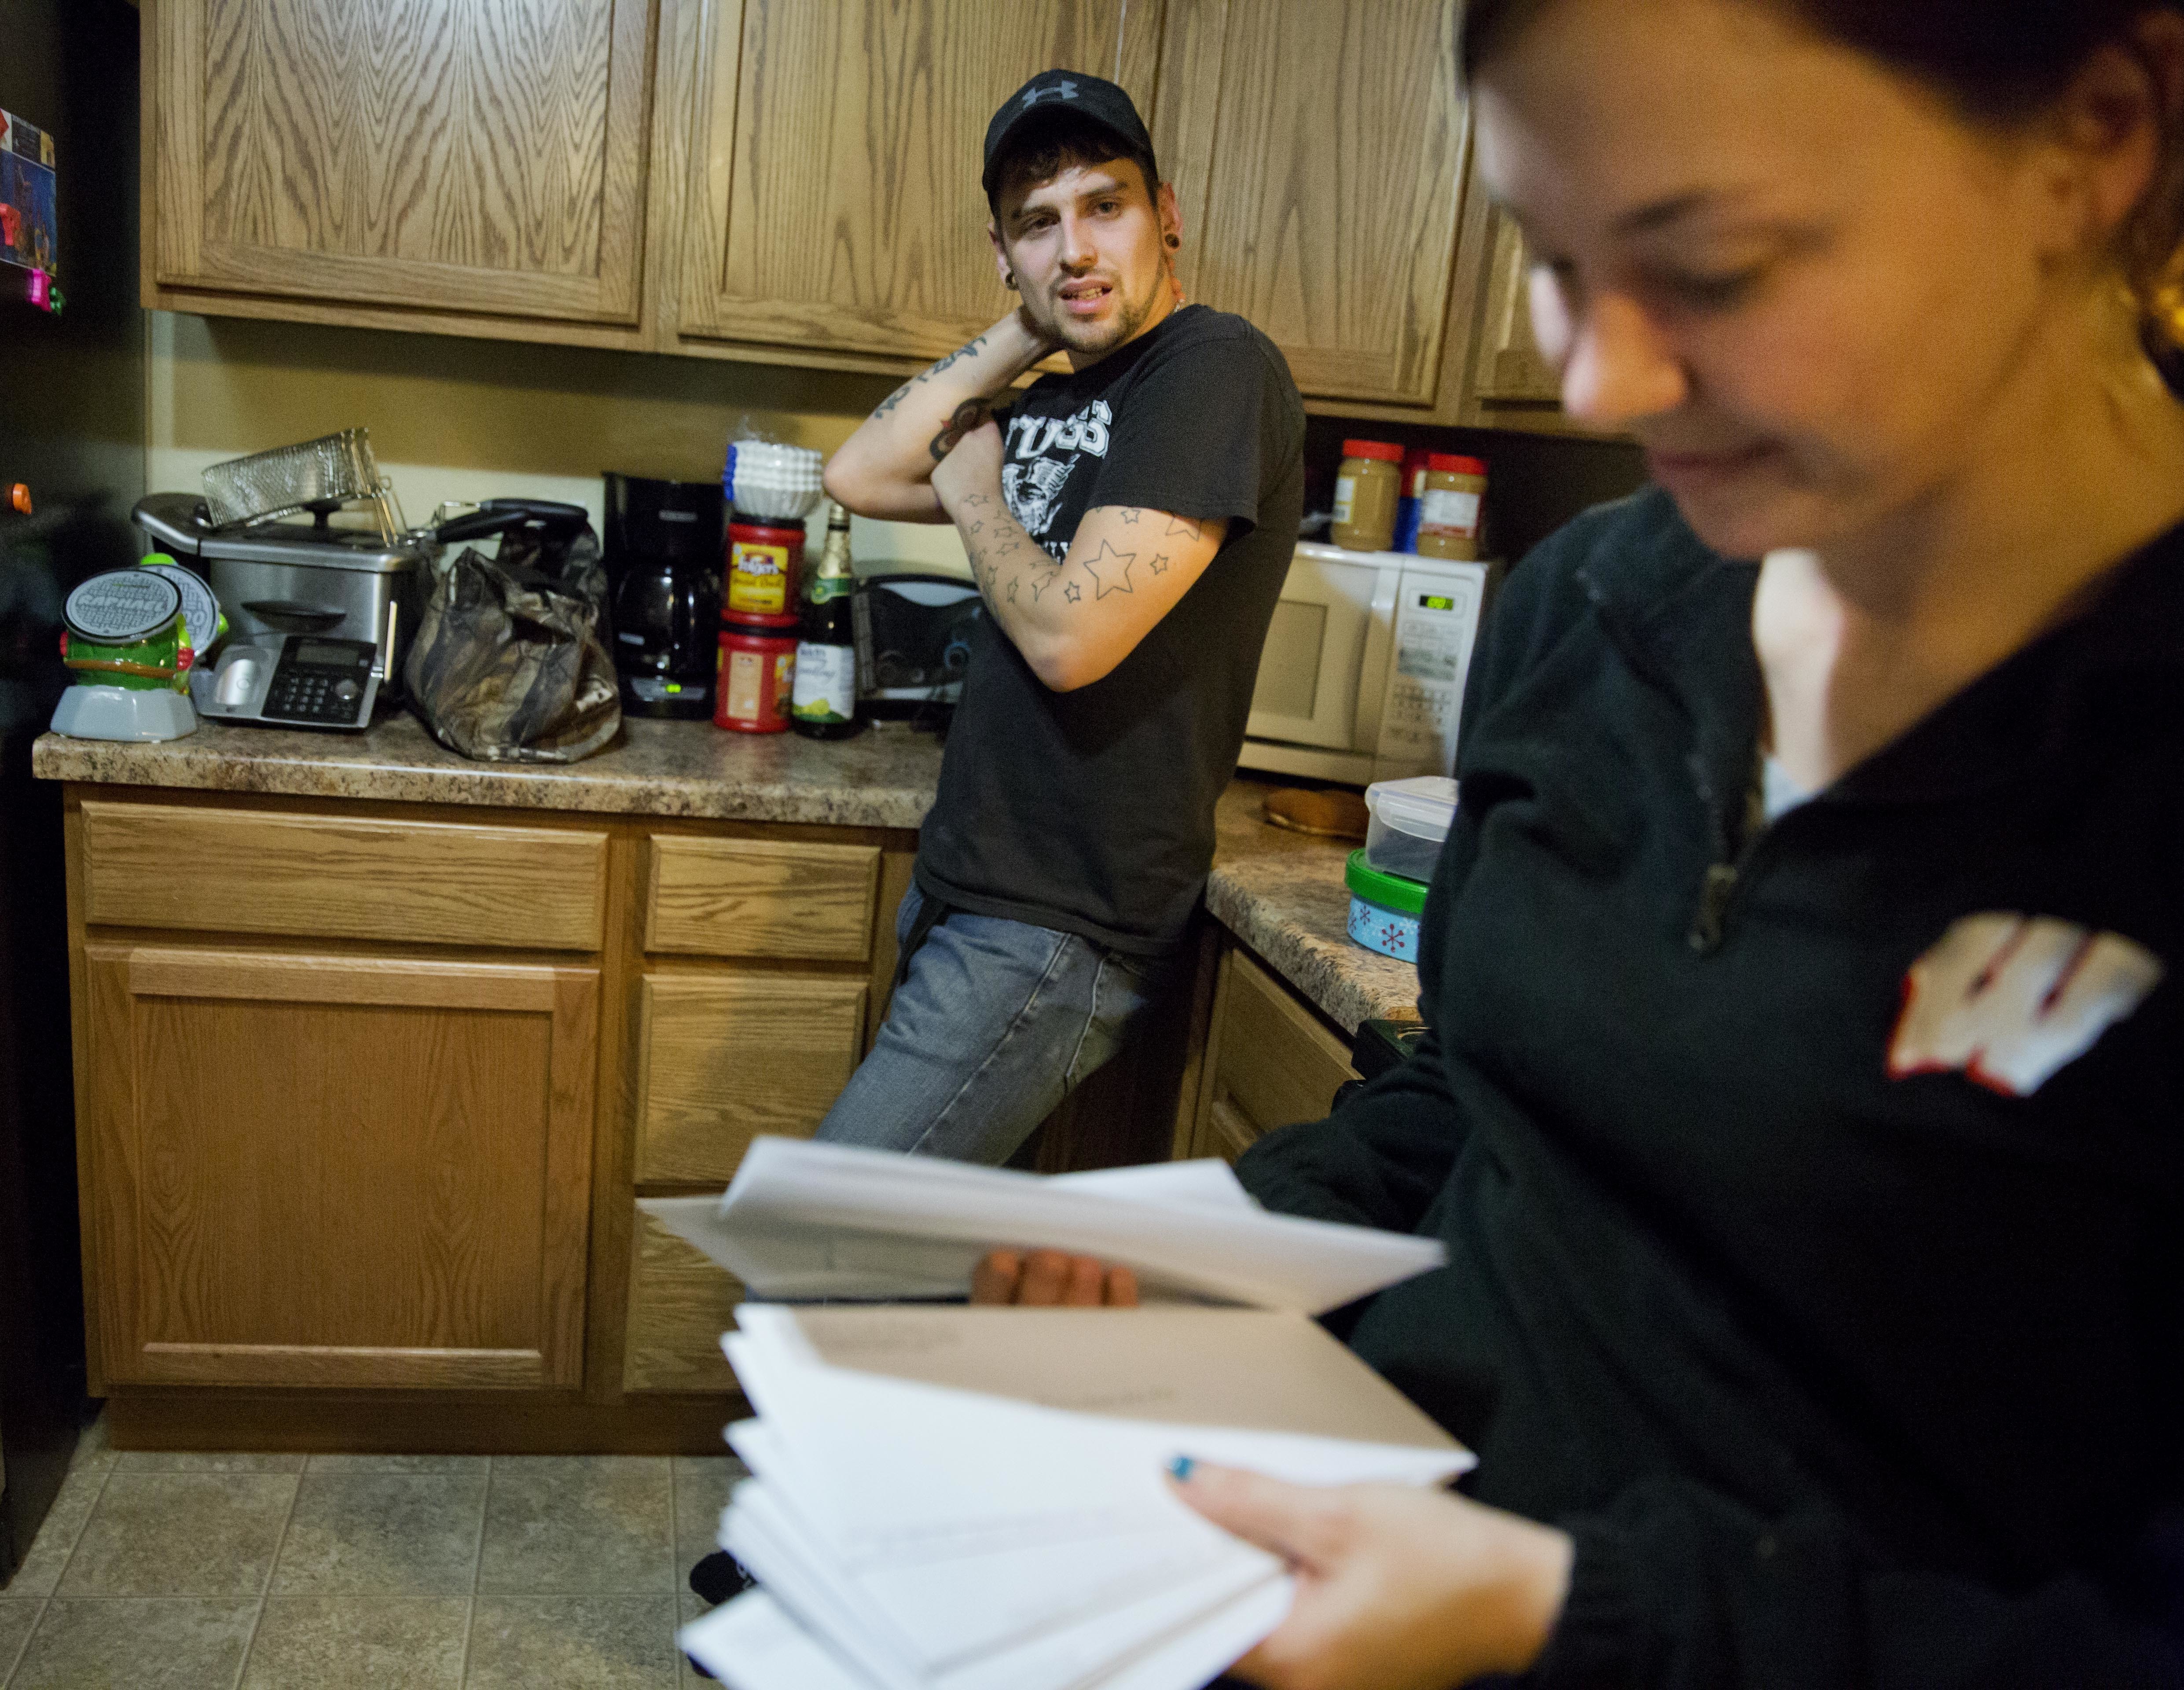 Kreig Holt, left, looks on as his wife, Lydia, flips through envelopes, each containing money for the each of the monthly bills they have to pay, as they stand in their kitchen in Wauzeka, Wis. They both earn about $10 an hour and, with two kids, there's always one or two they have to skip. She did the math; at this rate, they'll be paying these same bills for 87 years. In 2012, Lydia Holt voted for Barack Obama because he promised her change, but she feels that change hasn't reached her here. So in 2016, she chose Donald Trump. (AP Photo/David Goldman)